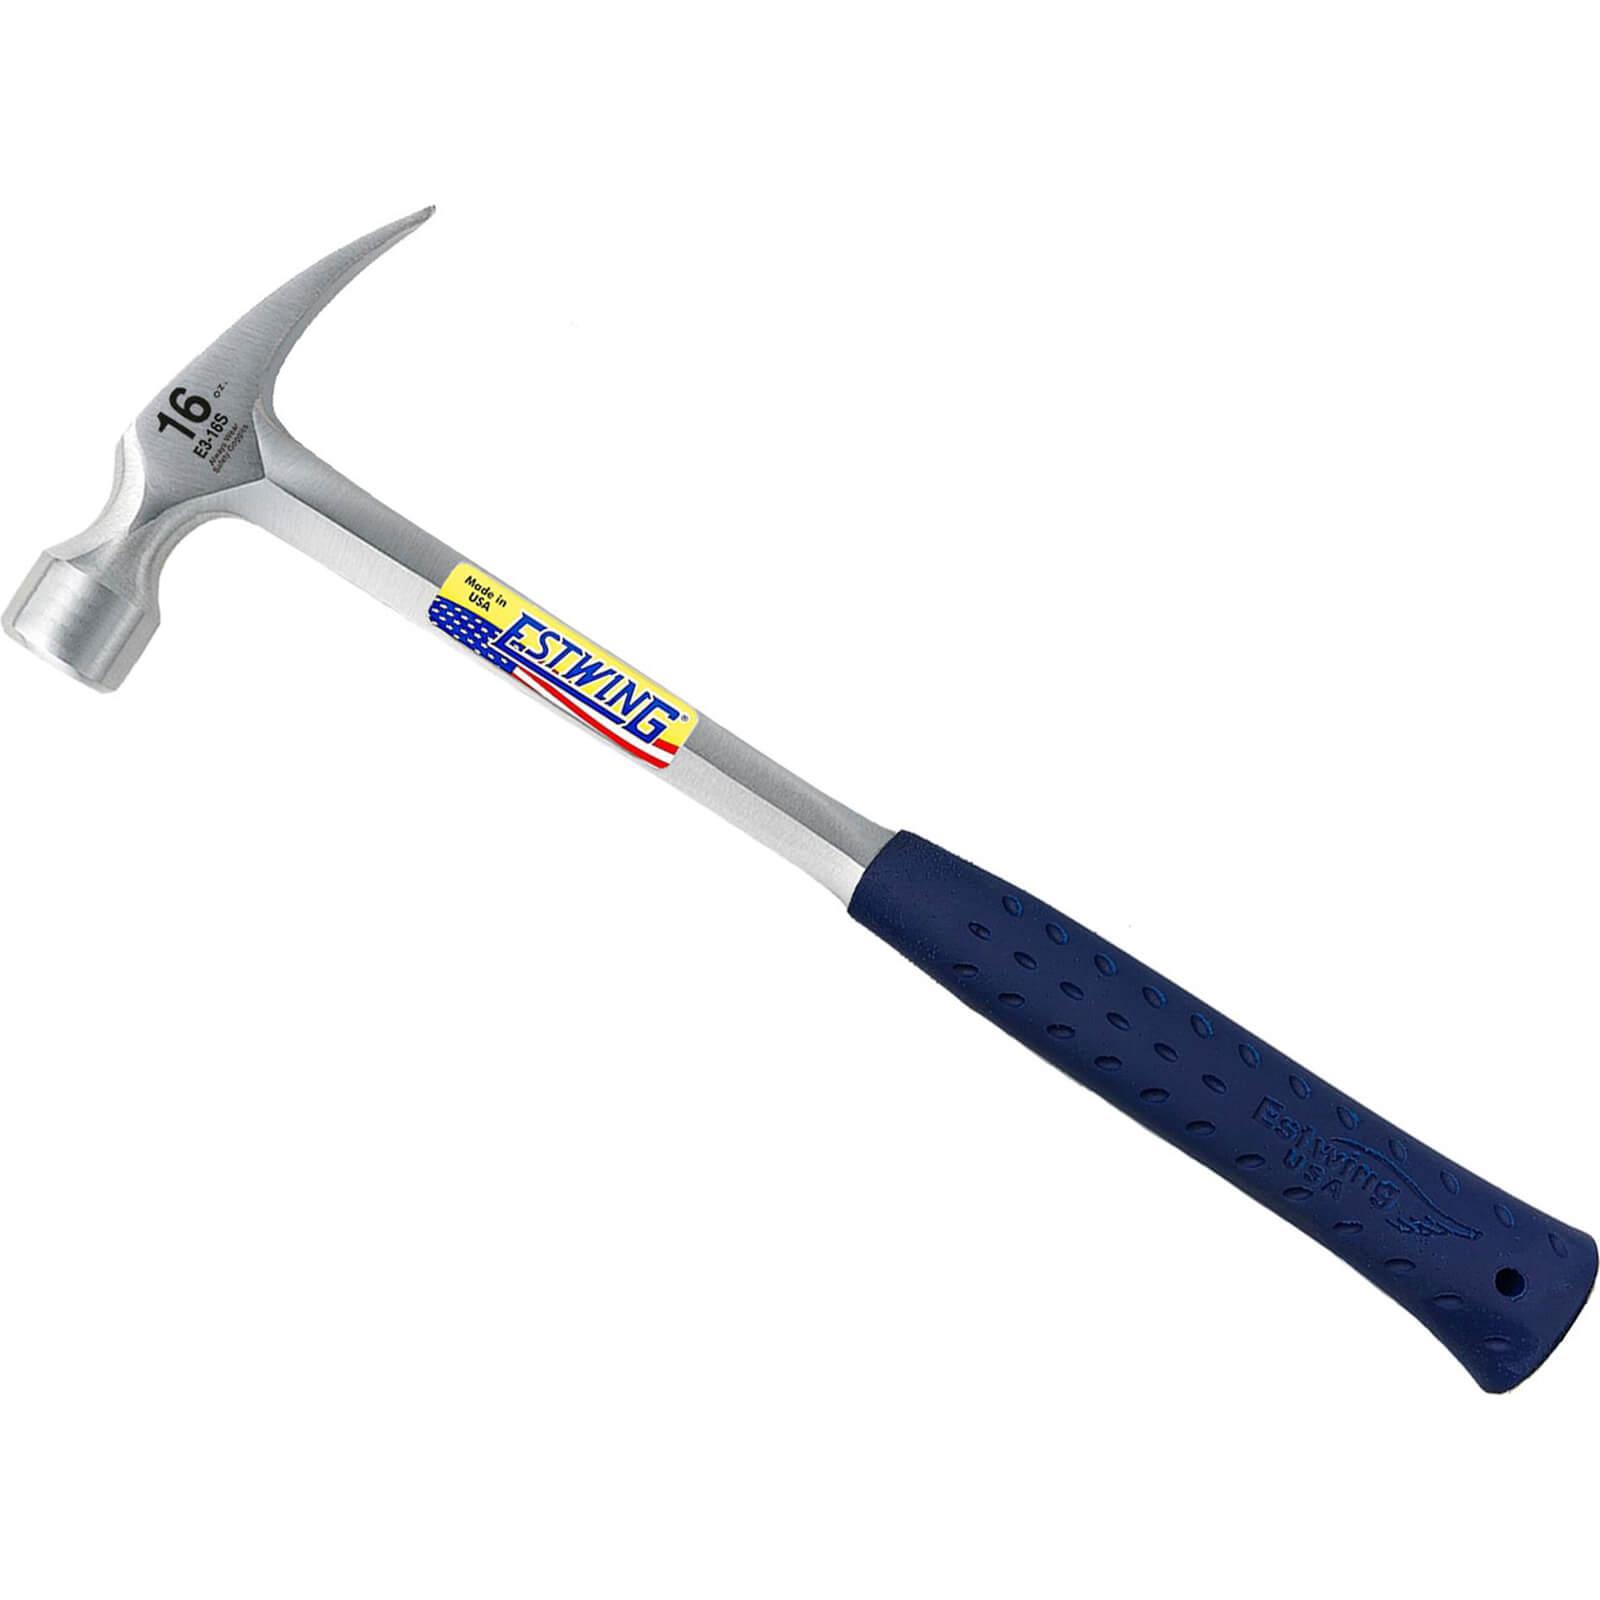 Image of Estwing Straight Claw Hammer 560g